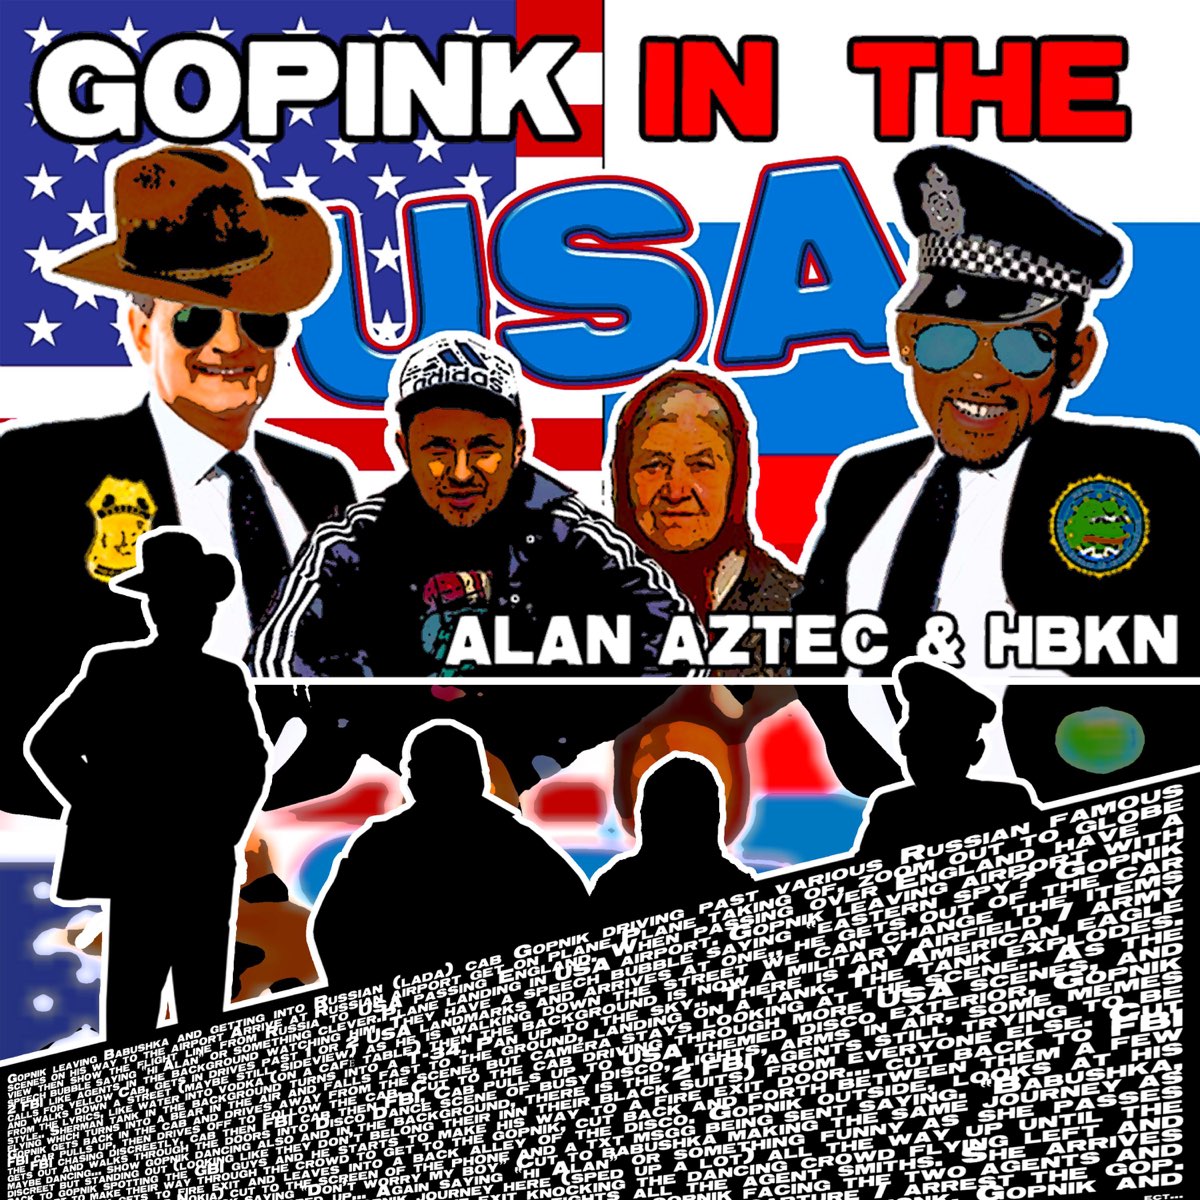 Gopnik in the USA (feat. Hbkn) - Single by Alan Aztec on Apple Music